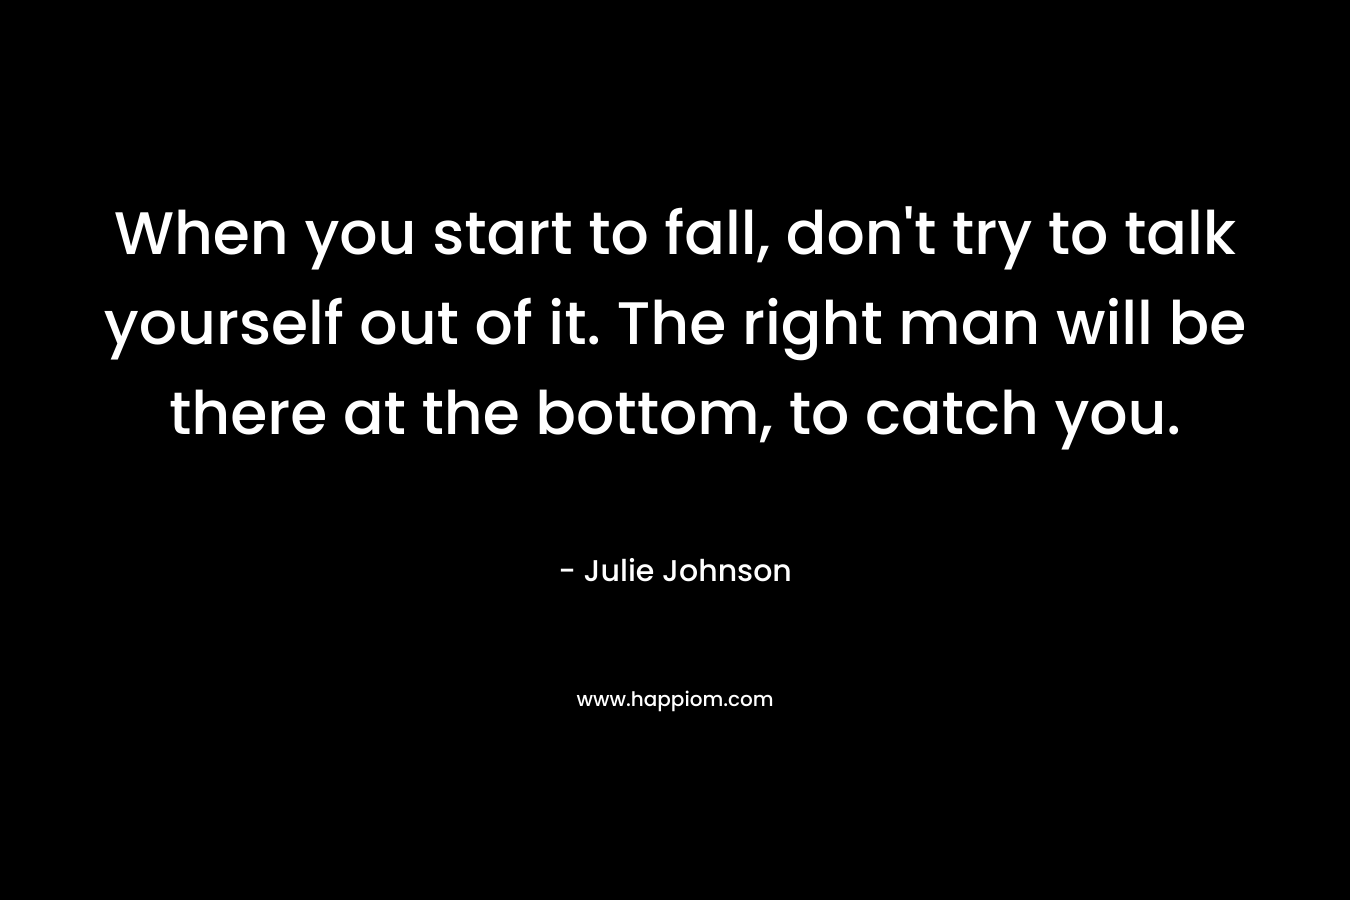 When you start to fall, don't try to talk yourself out of it. The right man will be there at the bottom, to catch you.